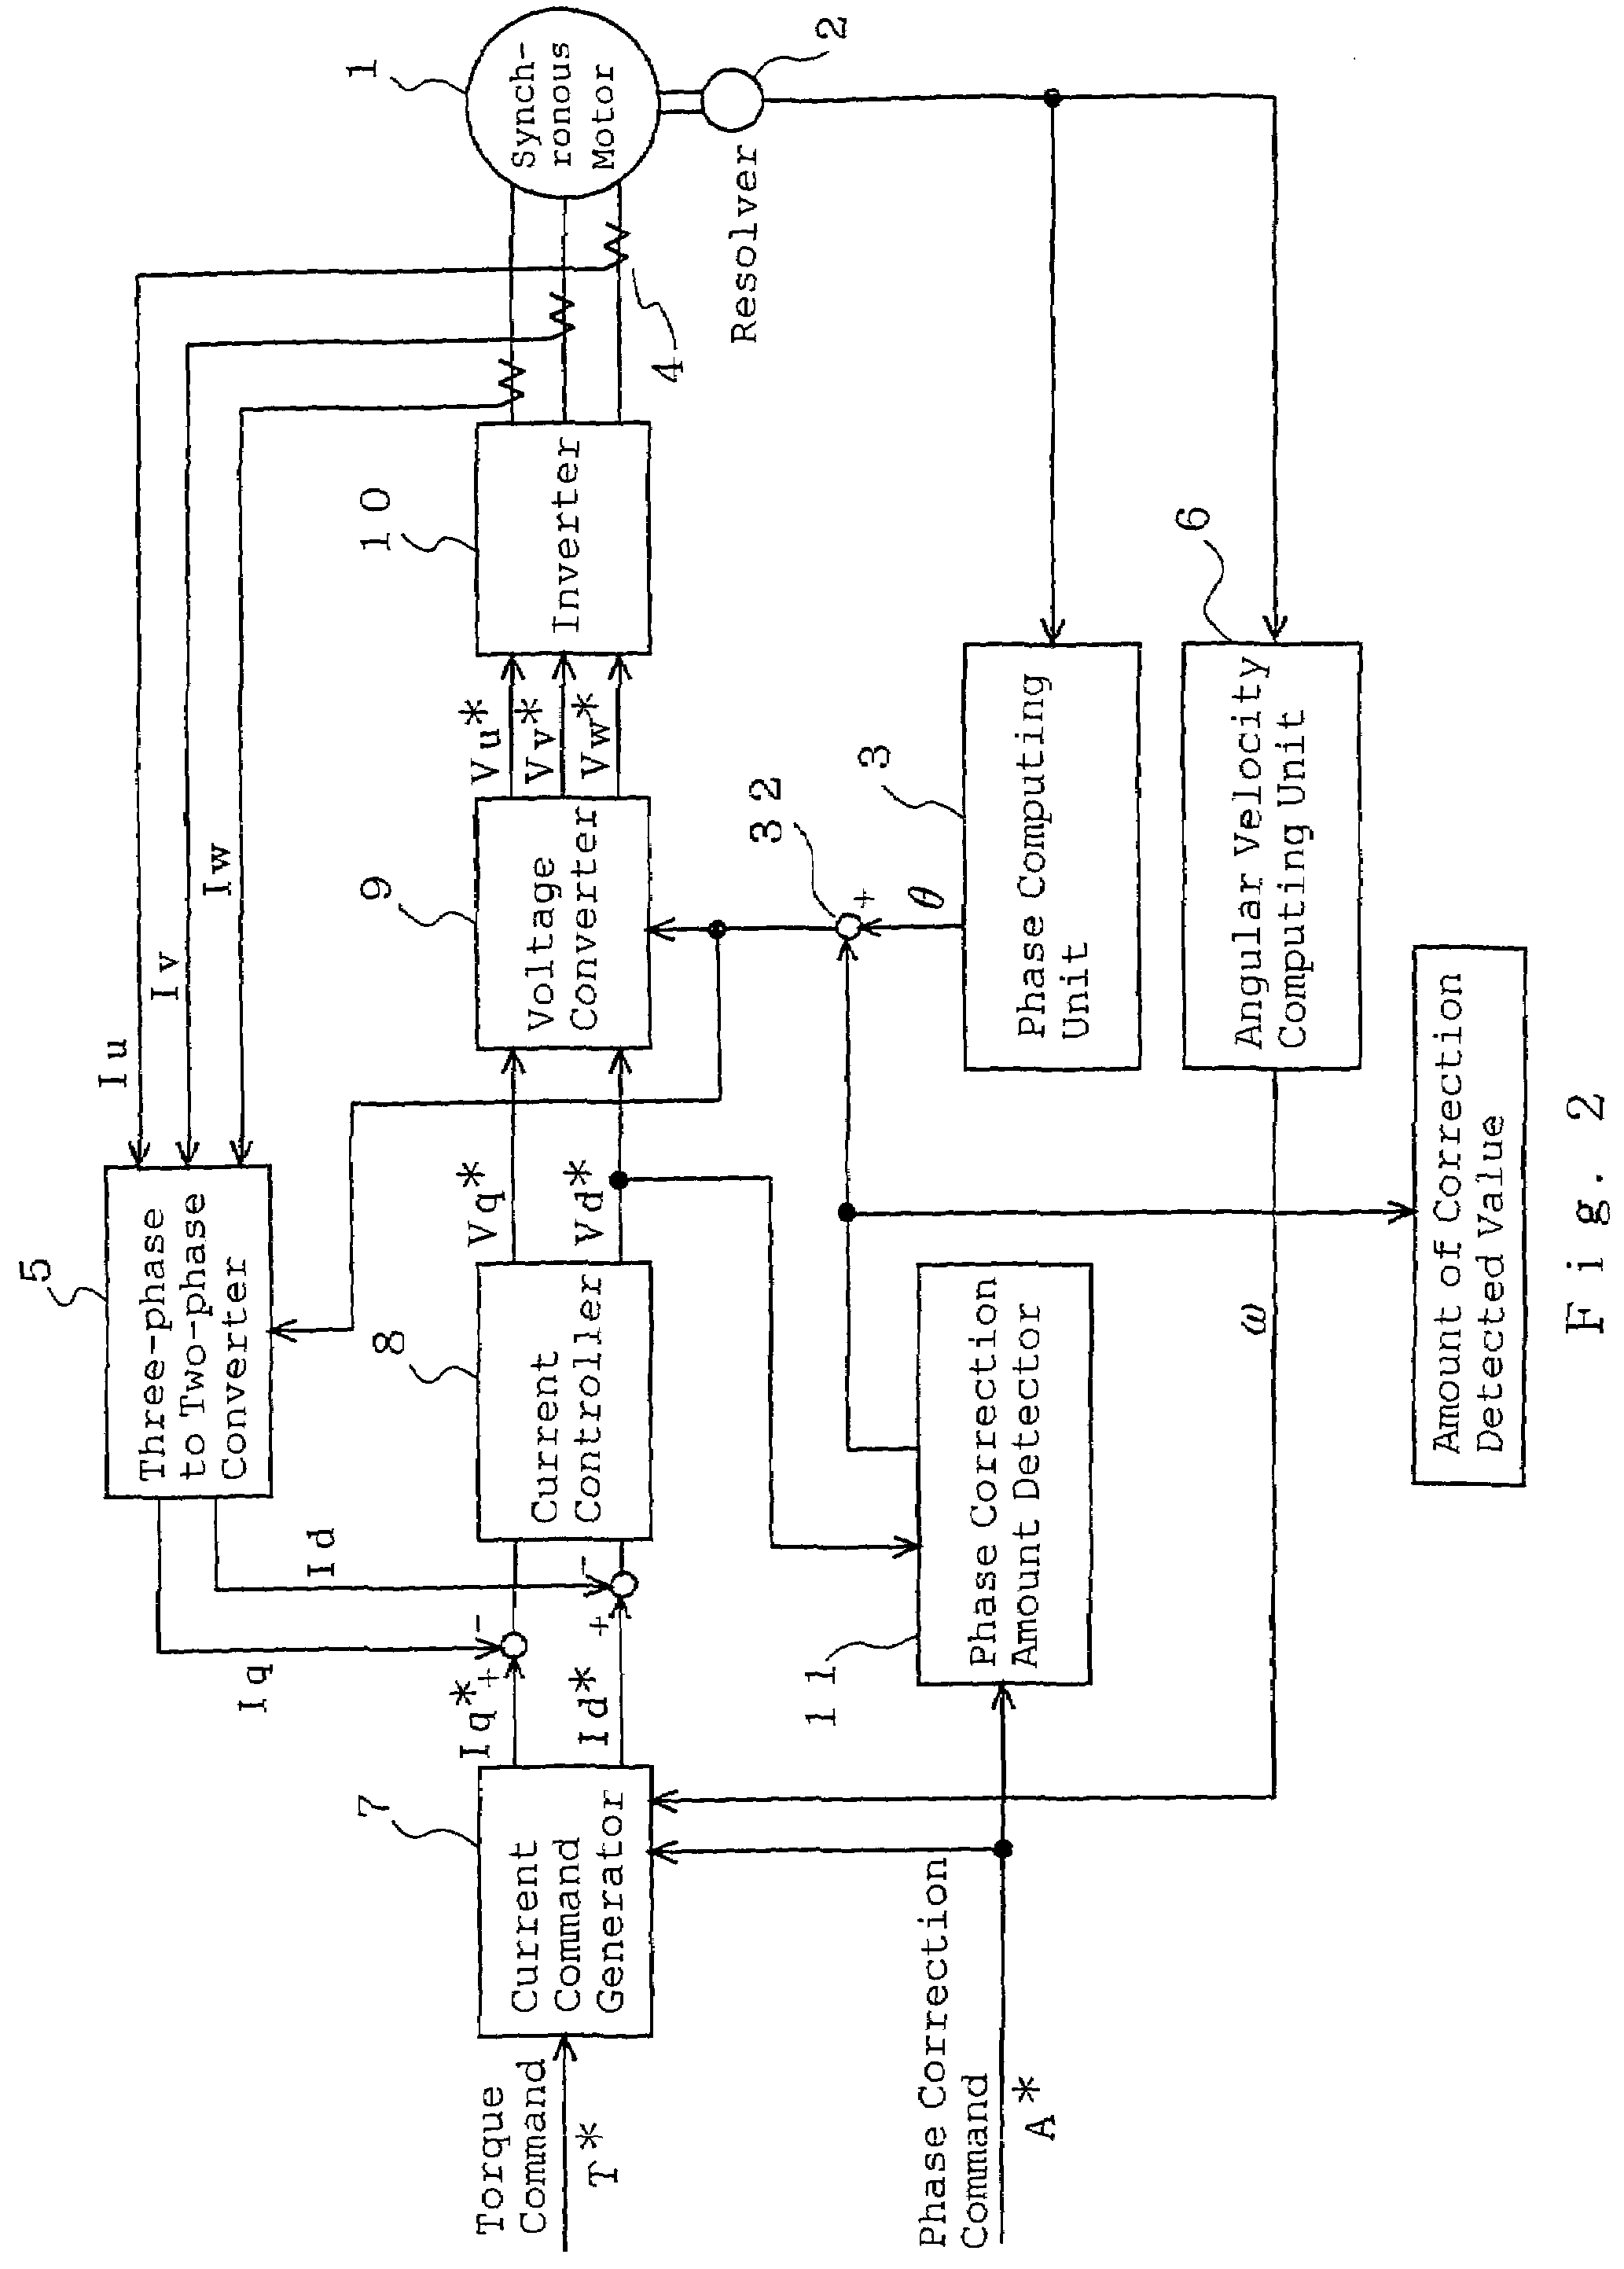 Adjustment method of rotor position detection of synchronous motor